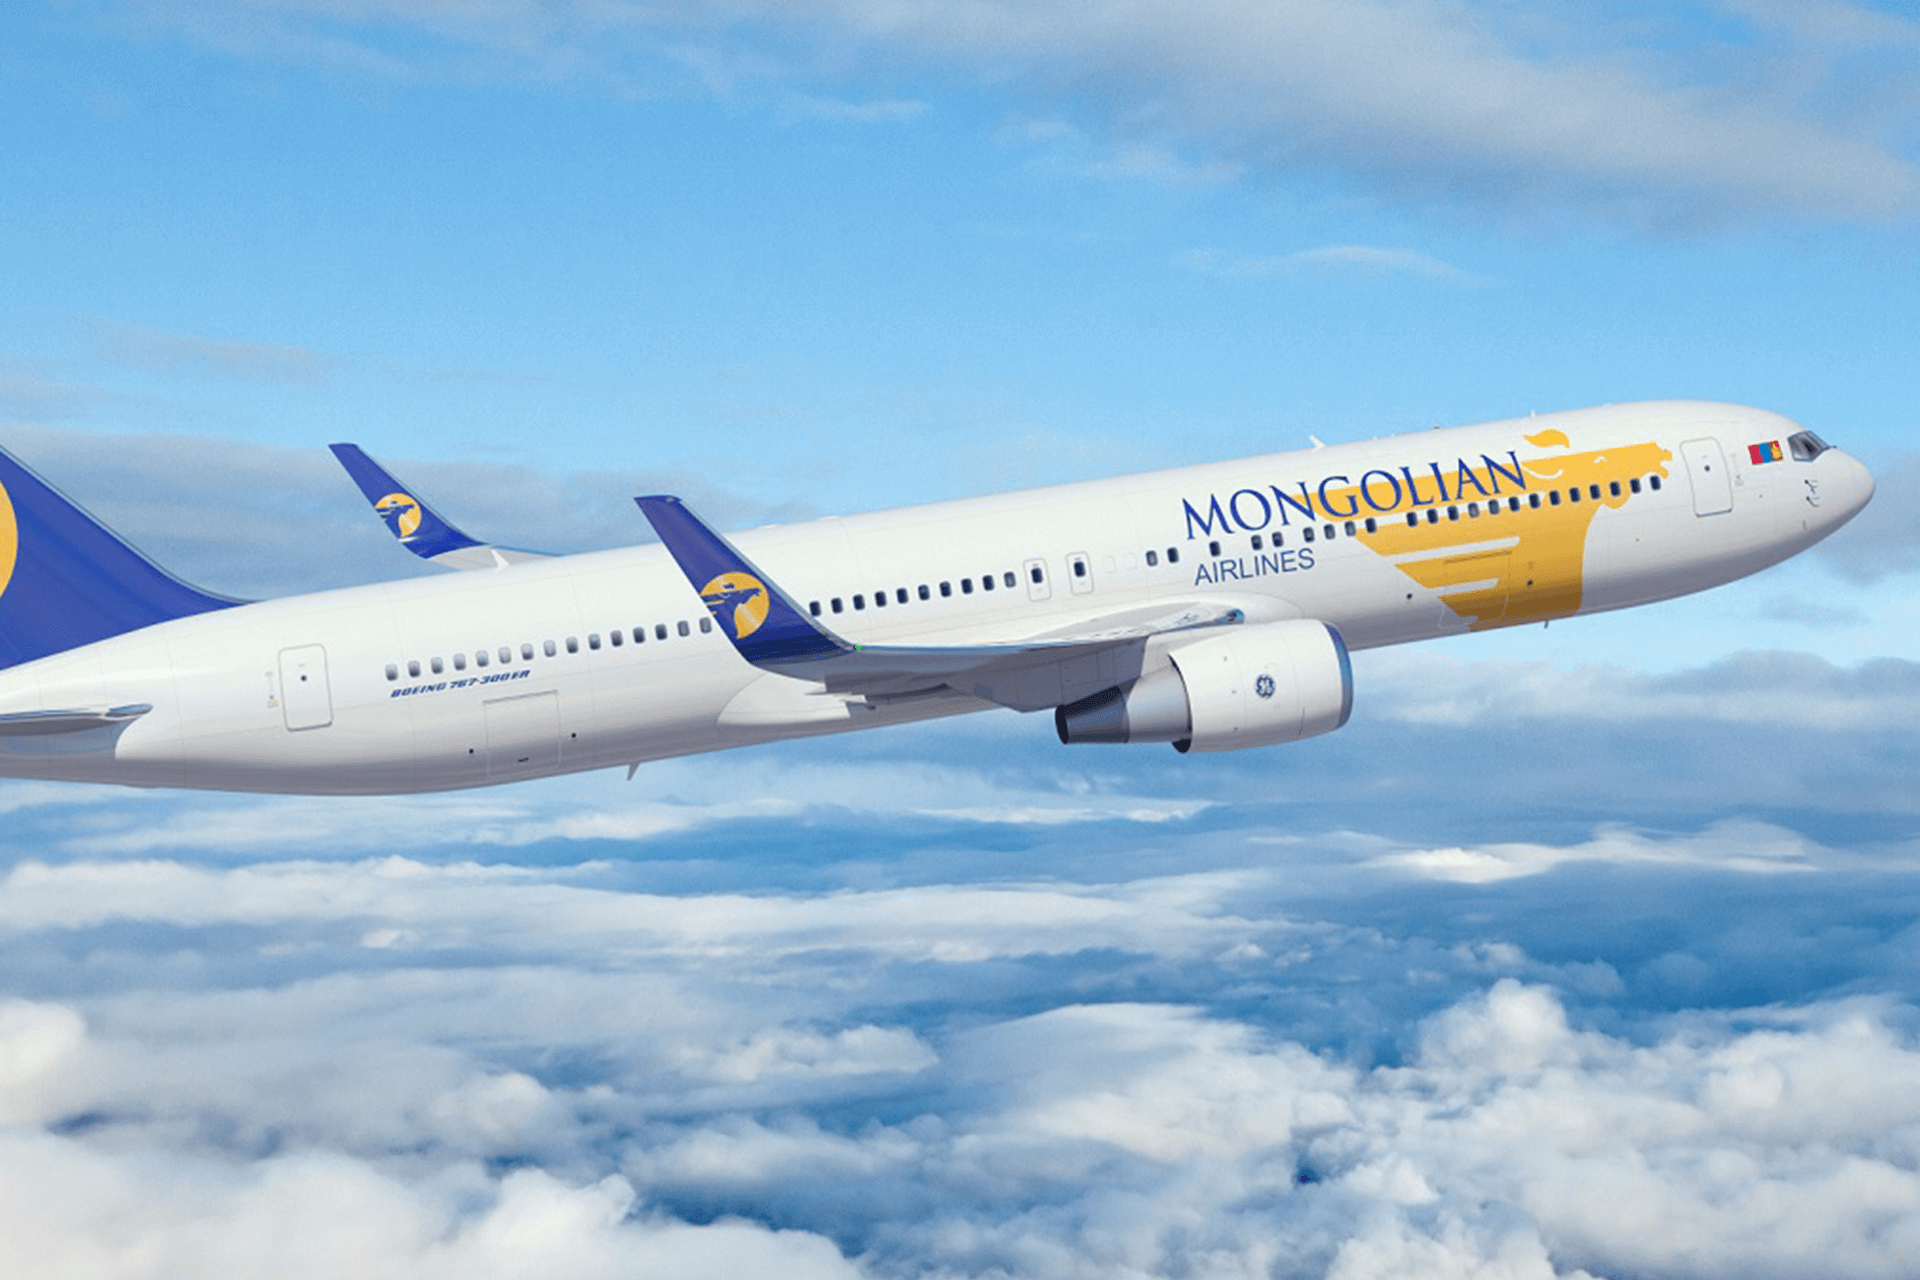 Miat Mongolian Airlines Group travel airplane